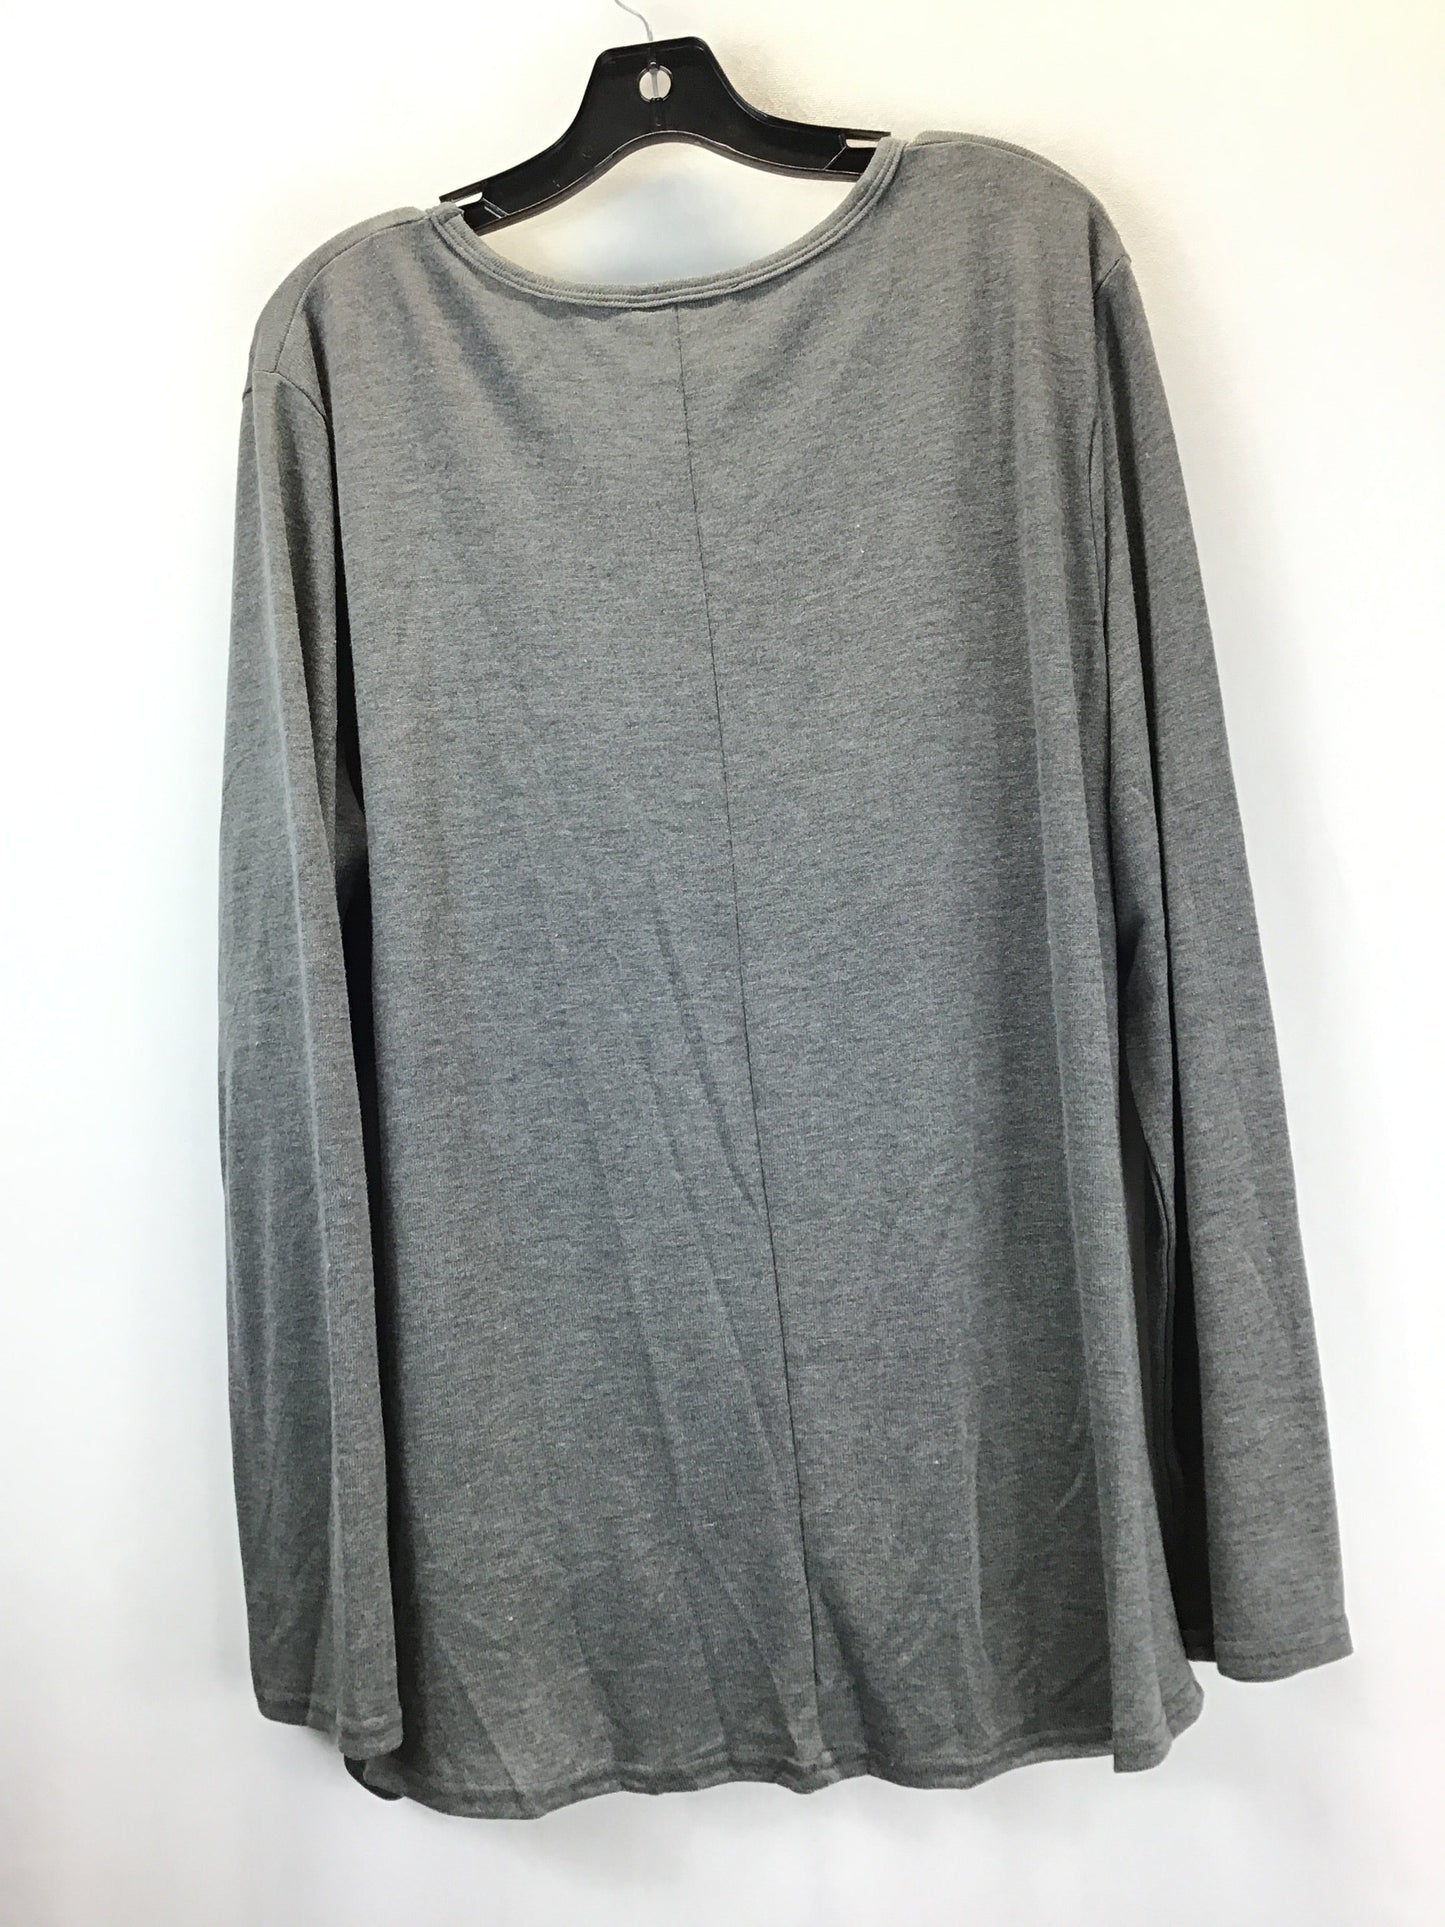 Top Long Sleeve By She + Sky  Size: 2x